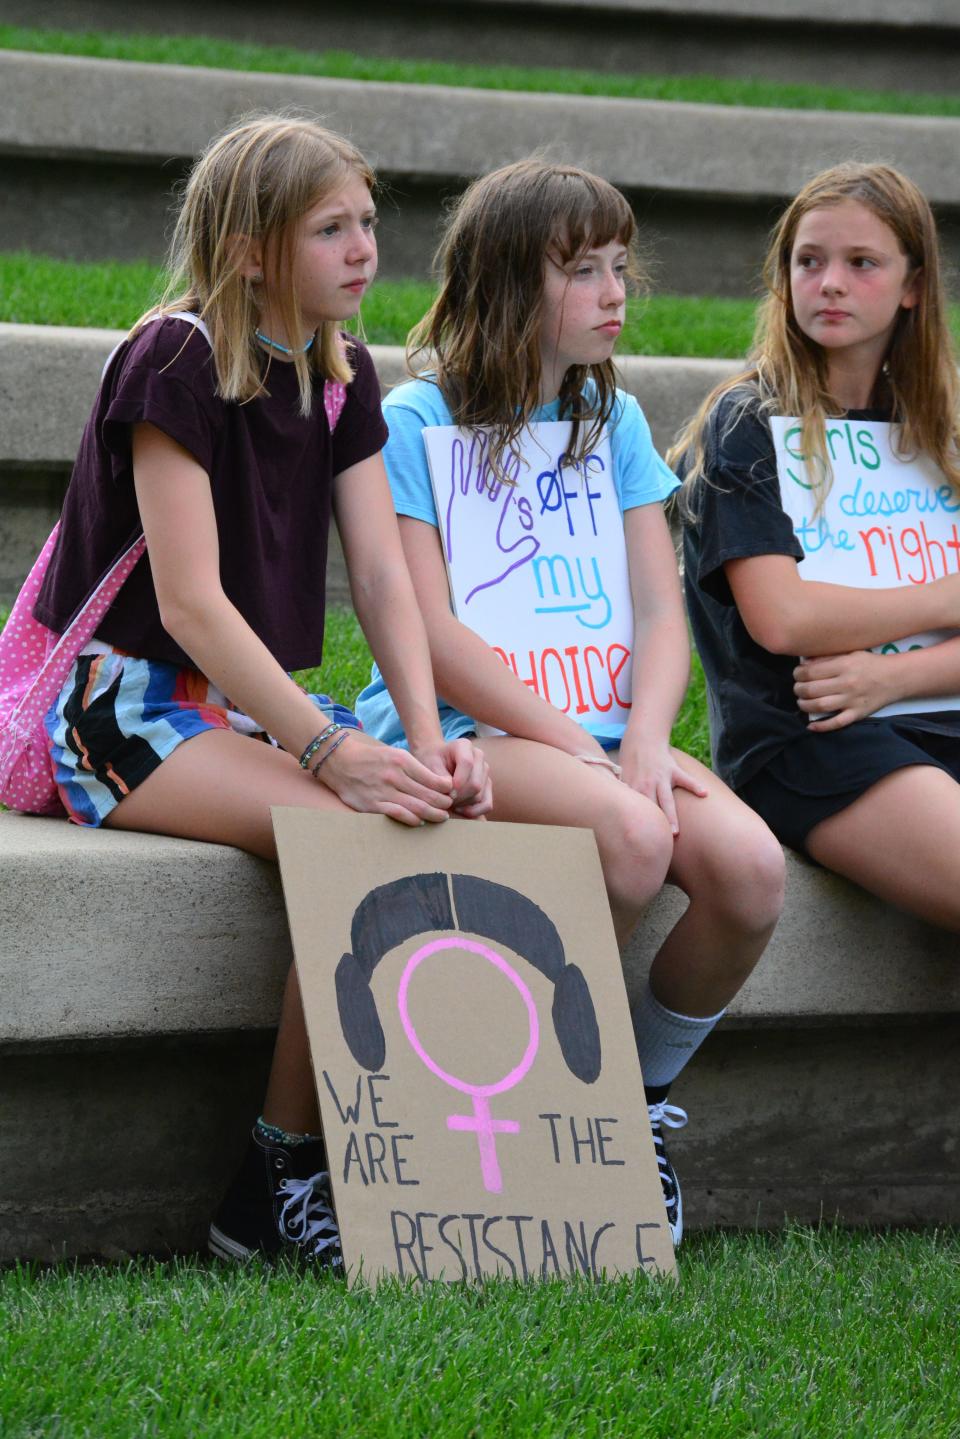 Ivy Blakey, 13, Brooklyn Alexander, 12, and Darcy Chegwidden, 12, listen to speakers and hold protest signs Saturday during an abortion rights rally outside of the Boone County Courthouse.